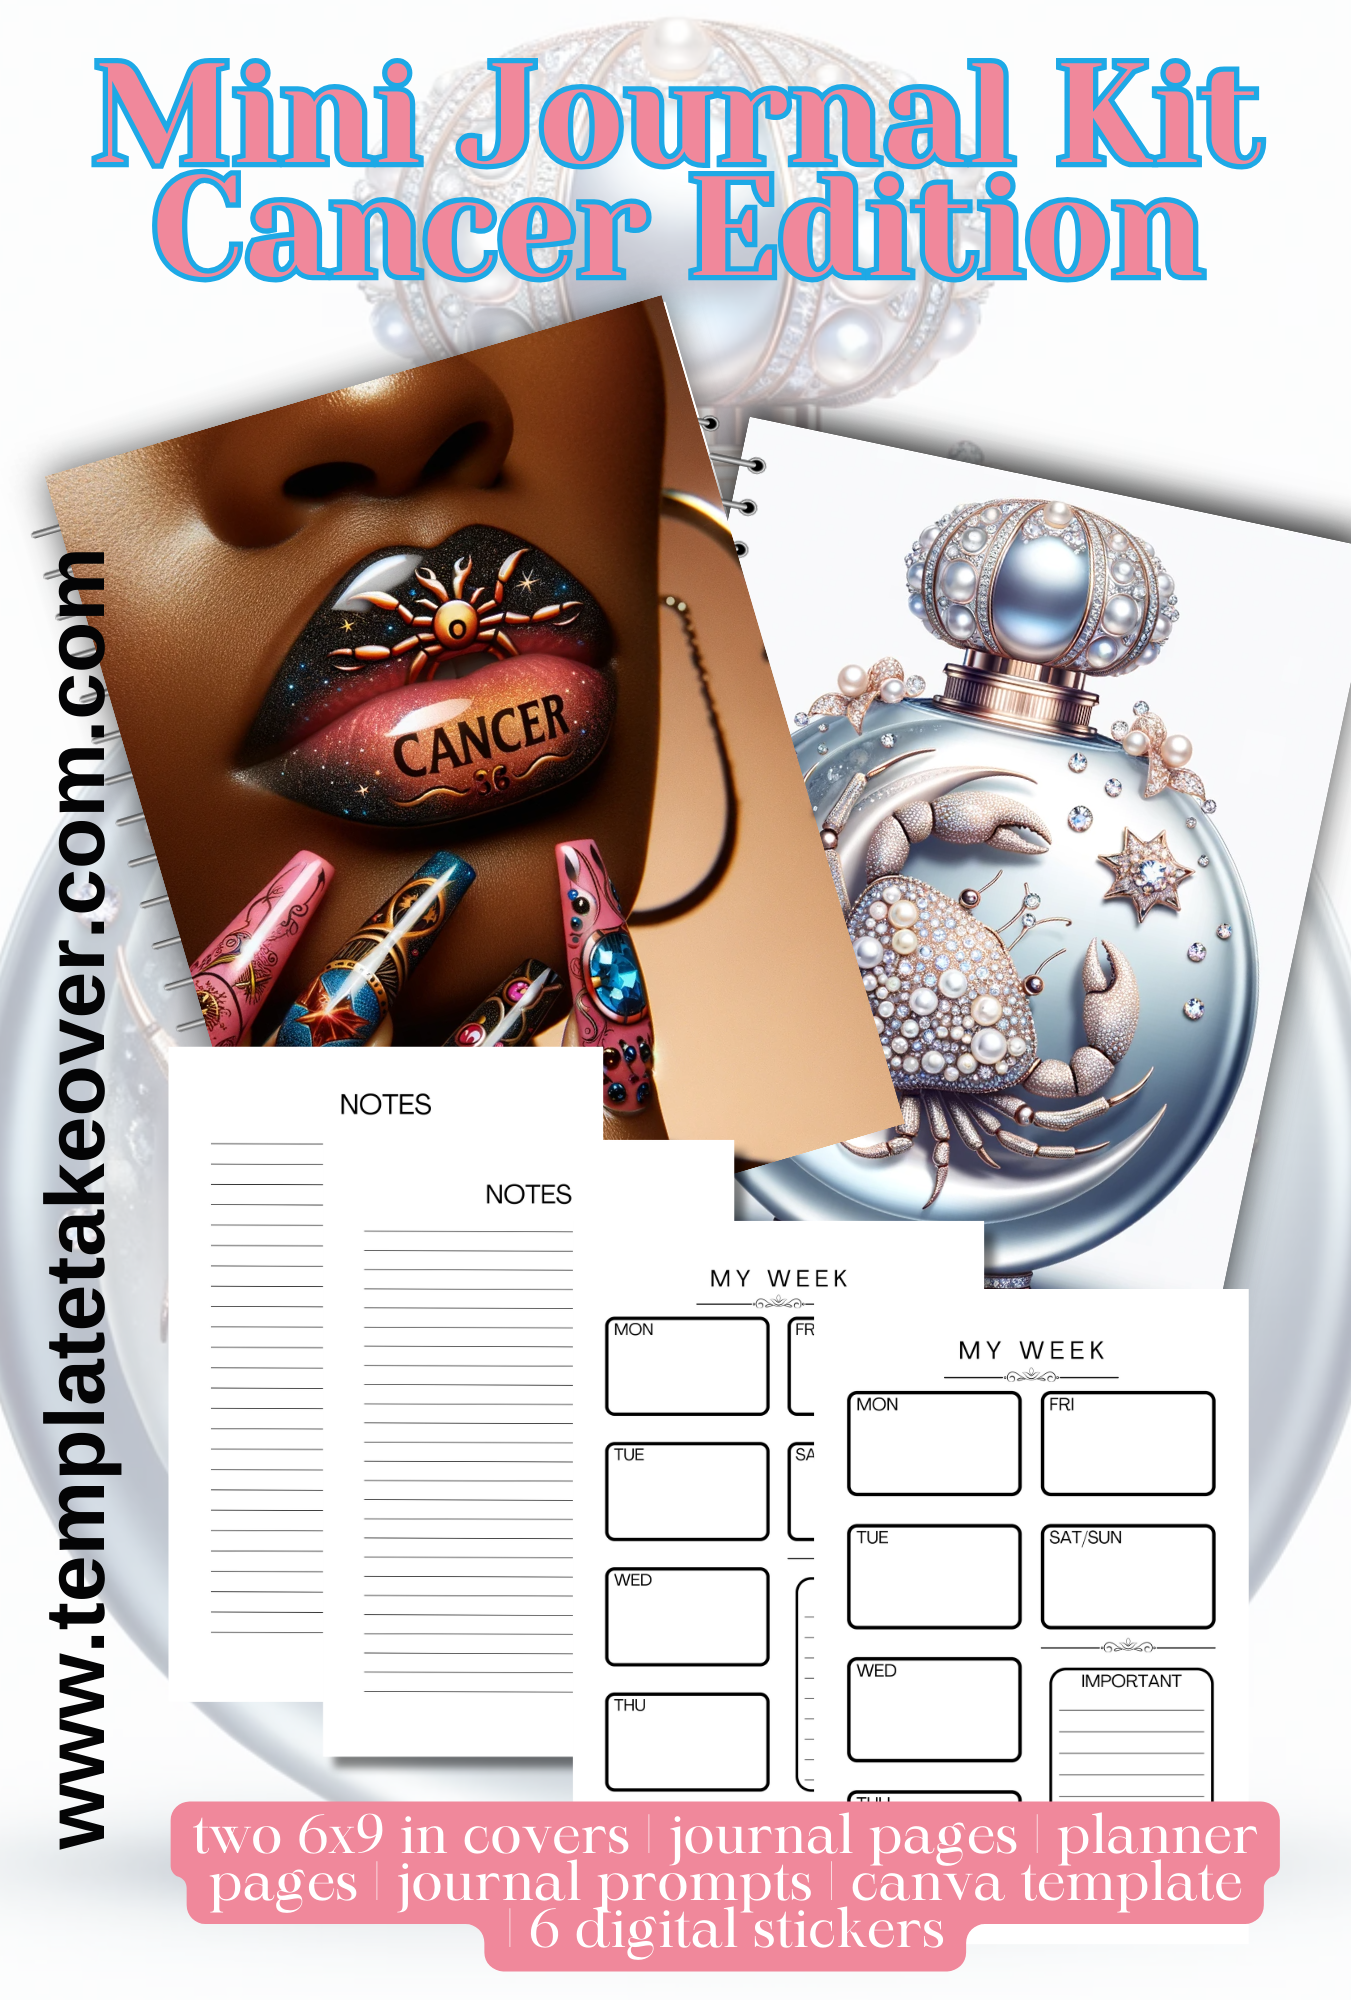 Celestial Scents: Cancer Edition Journal: Perfect for Crafters, Creatives, Coaches, and More - Set of 2 Covers, 15 Journal Pages, 5 Planner Pages, 15 Prompts and 6 Digital Stickers. Volume 3